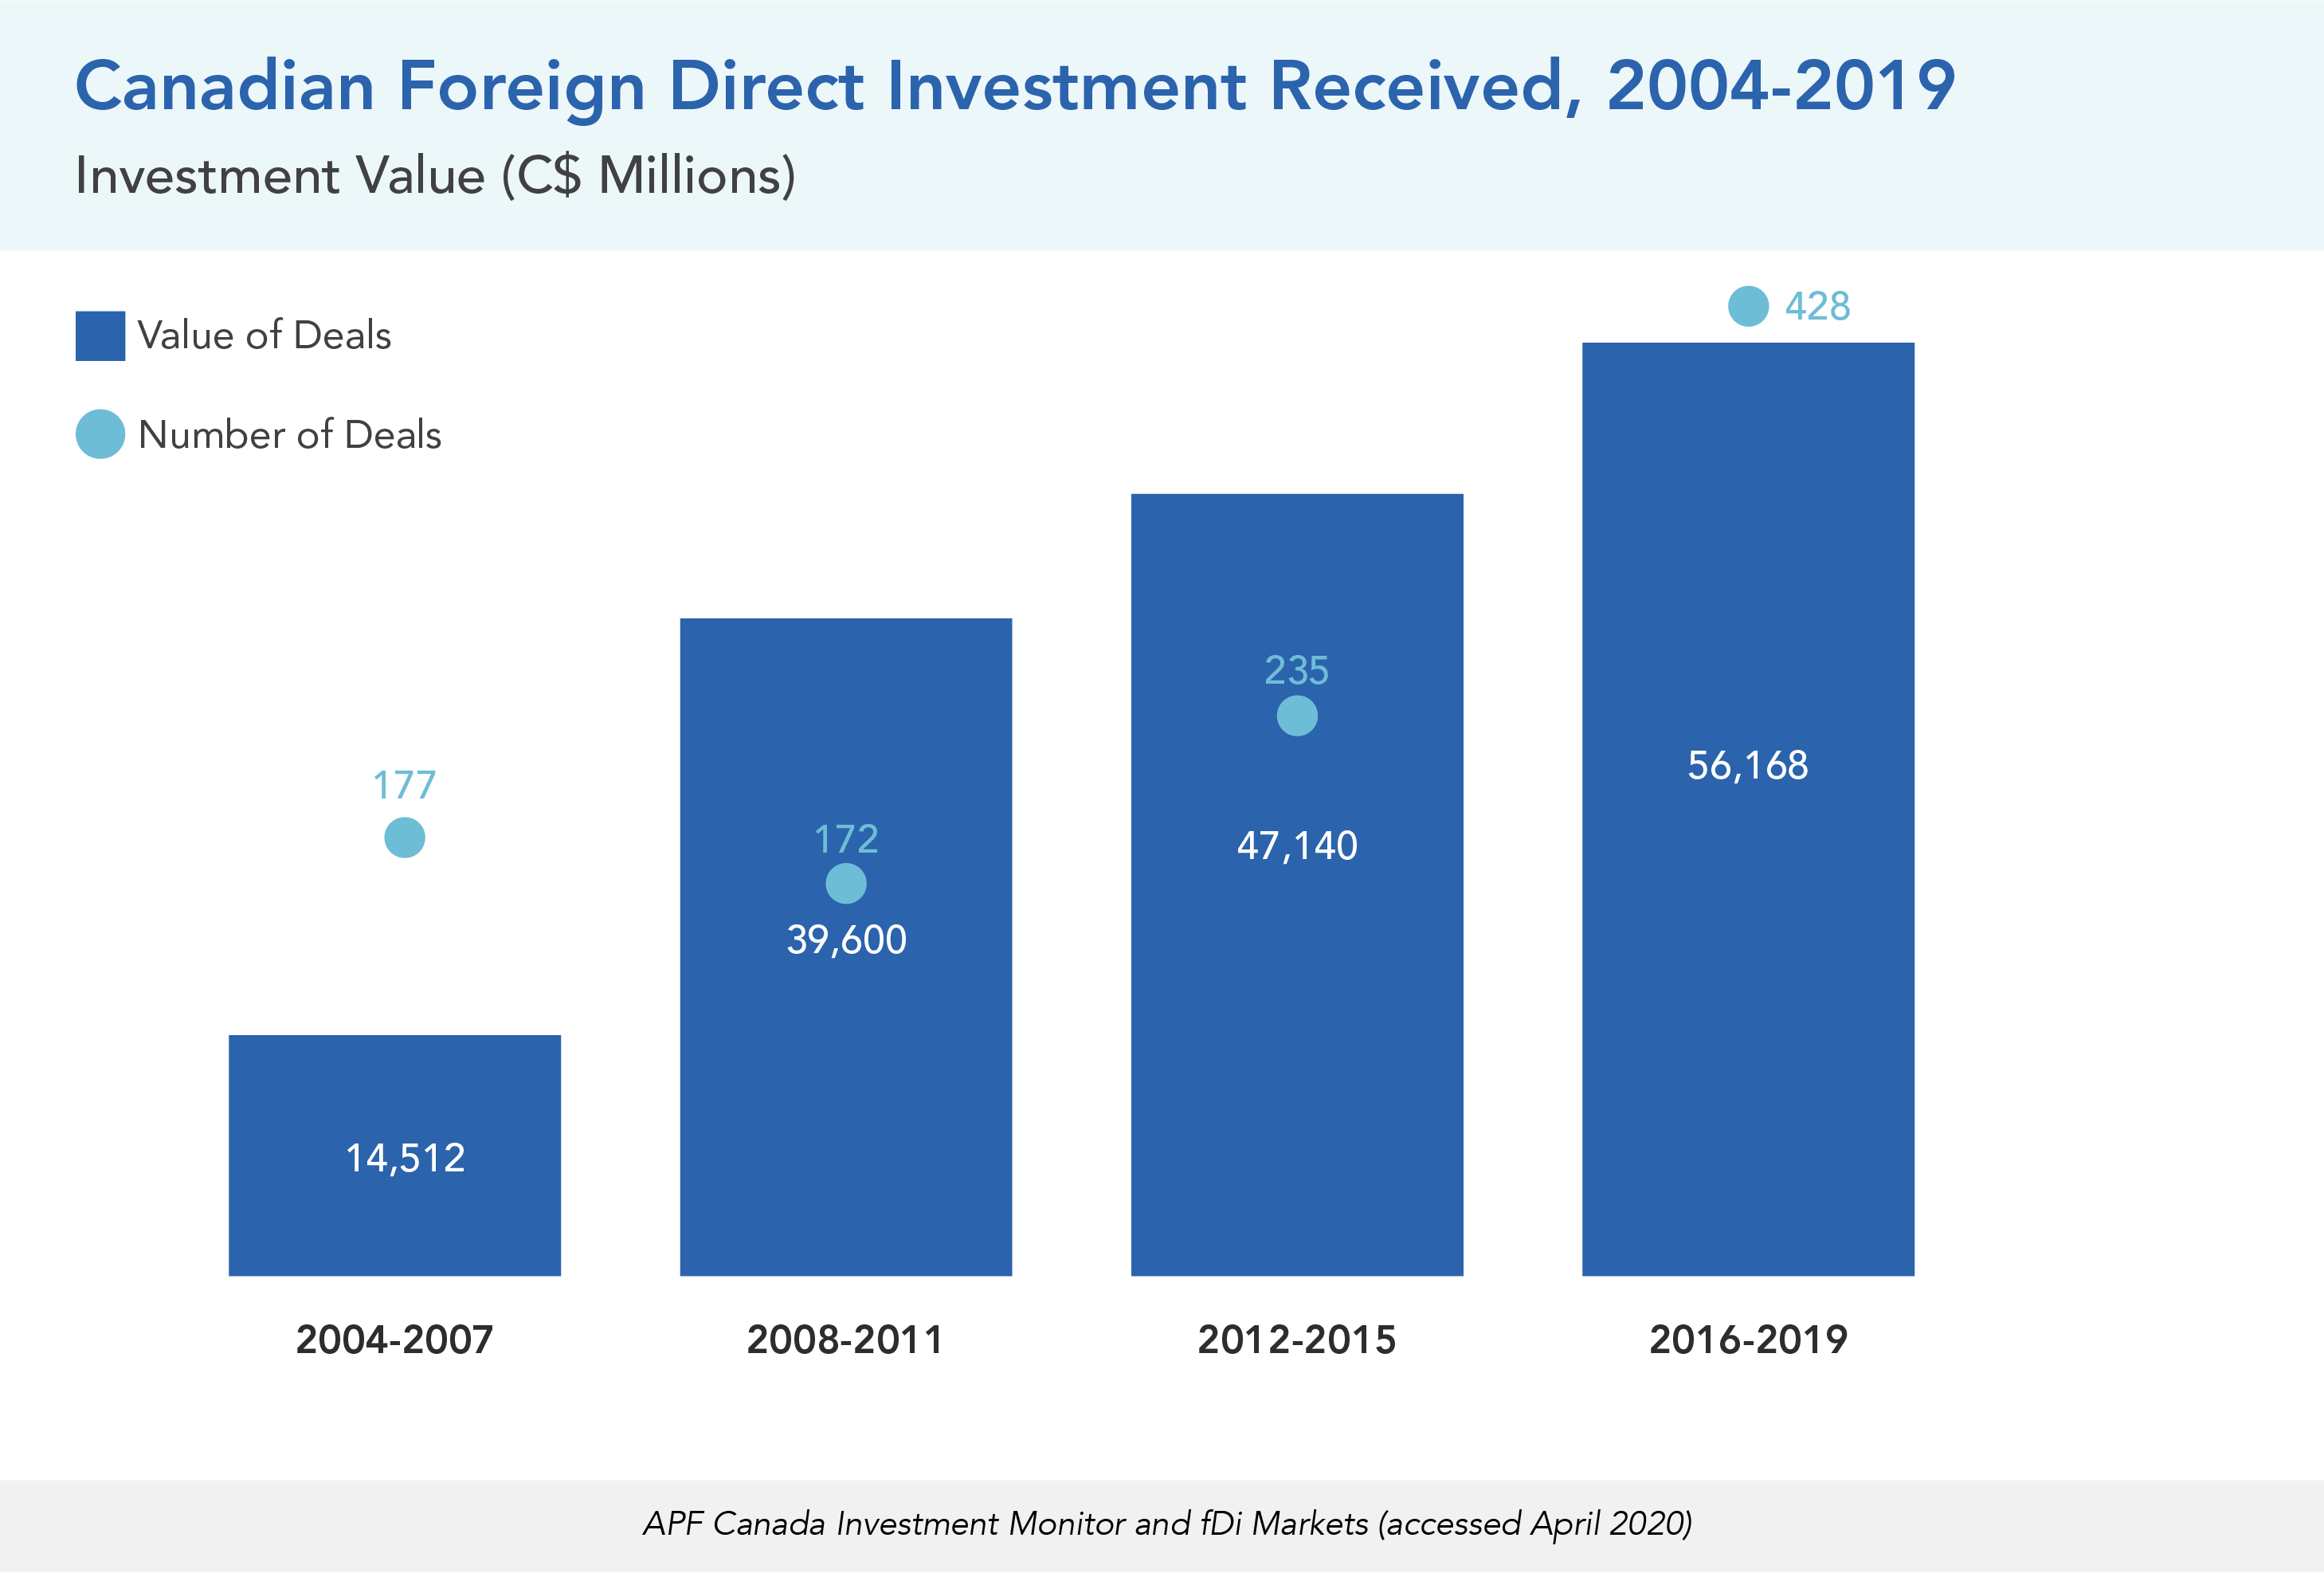 Canadian Foreign Direct Investment Received, 2004-2019